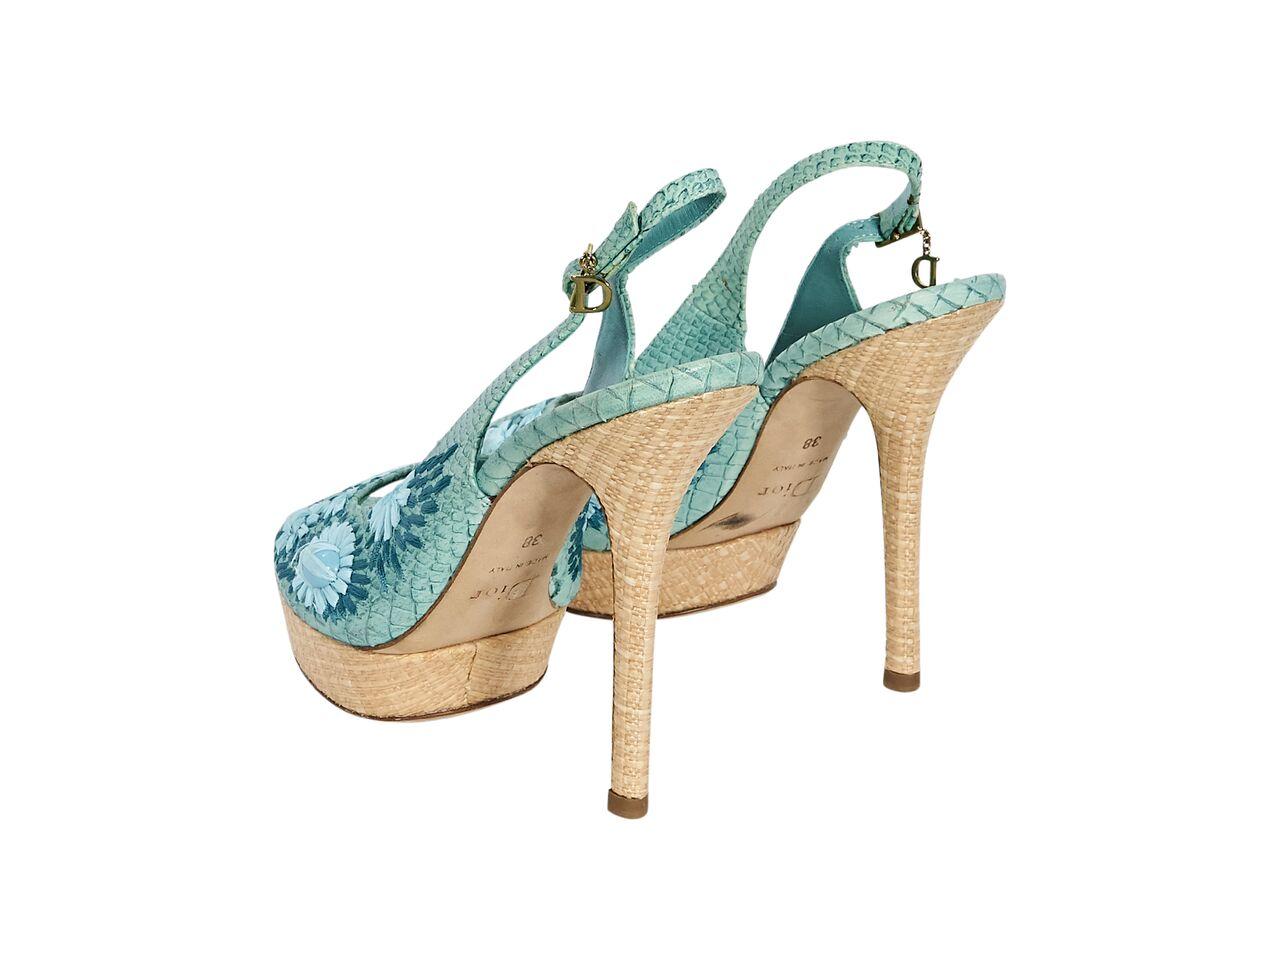 Product details:  Teal snake-embossed leather slingback pumps by Christian Dior.  Accented with floral applique.  Adjustable slingback strap.  Peep toe.  Towering tan woven heel and platform design.  5